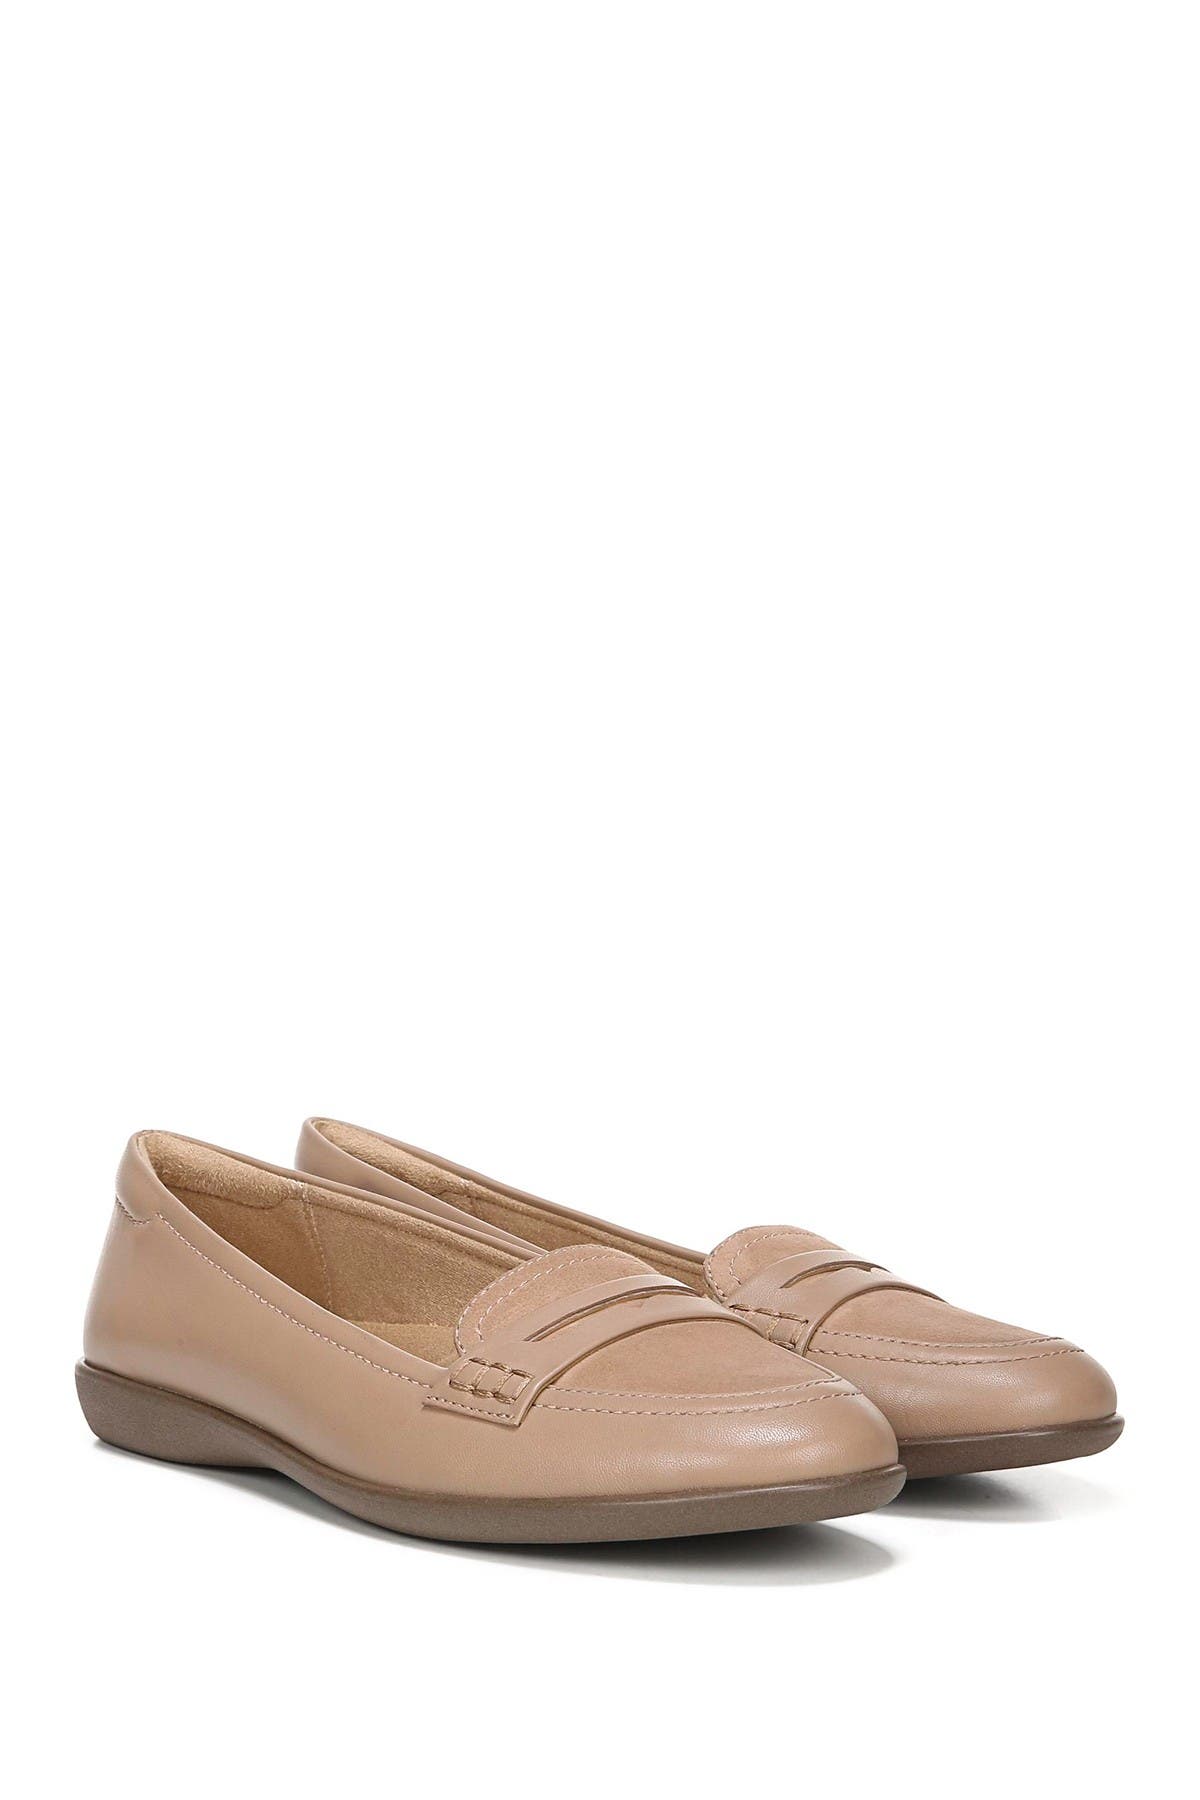 Finley Leather Penny Loafer 